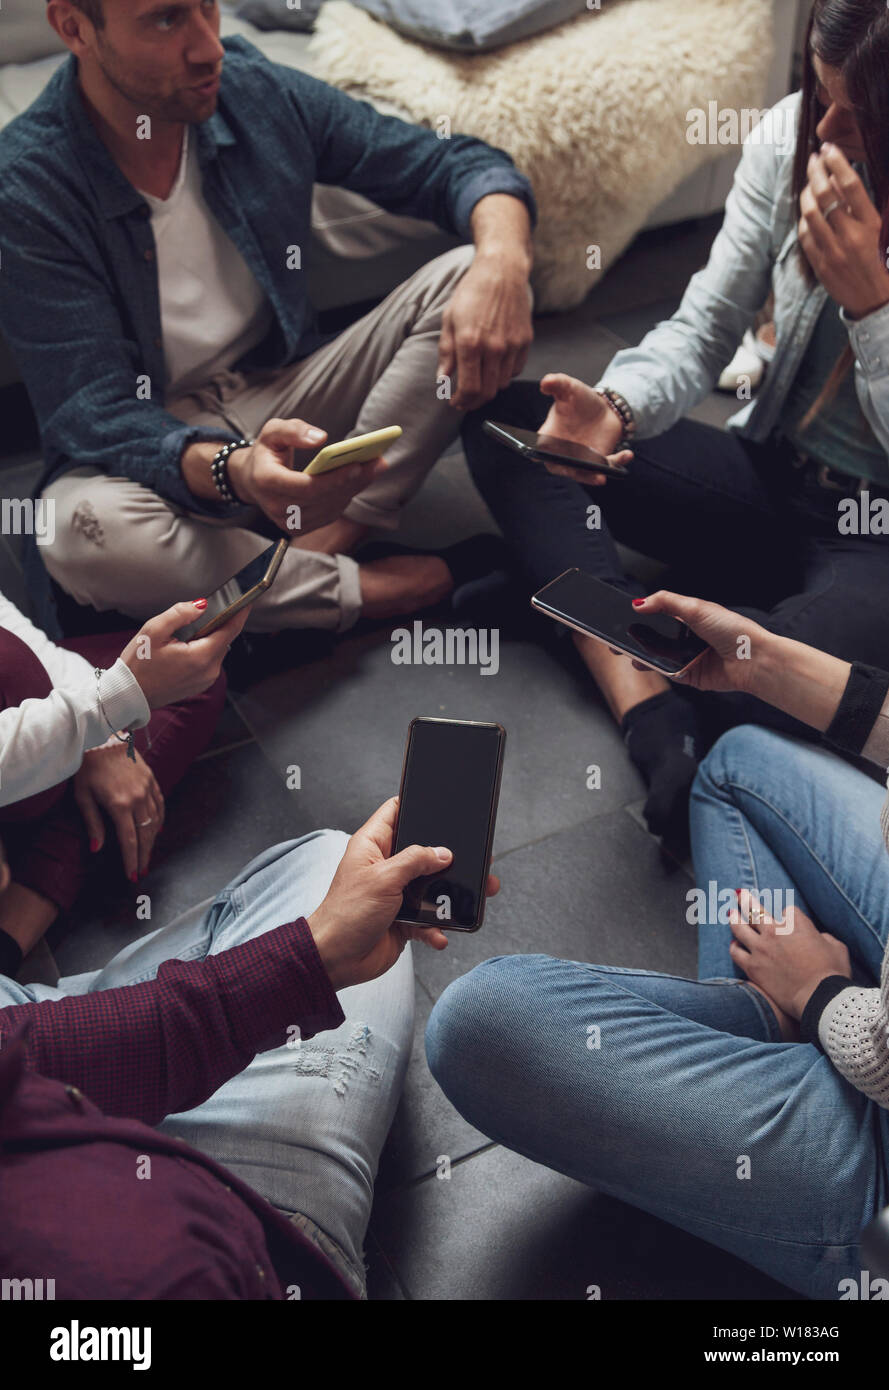 group of people addicted having fun together using smart phones - Technology concept with millennial online with cellphones Stock Photo